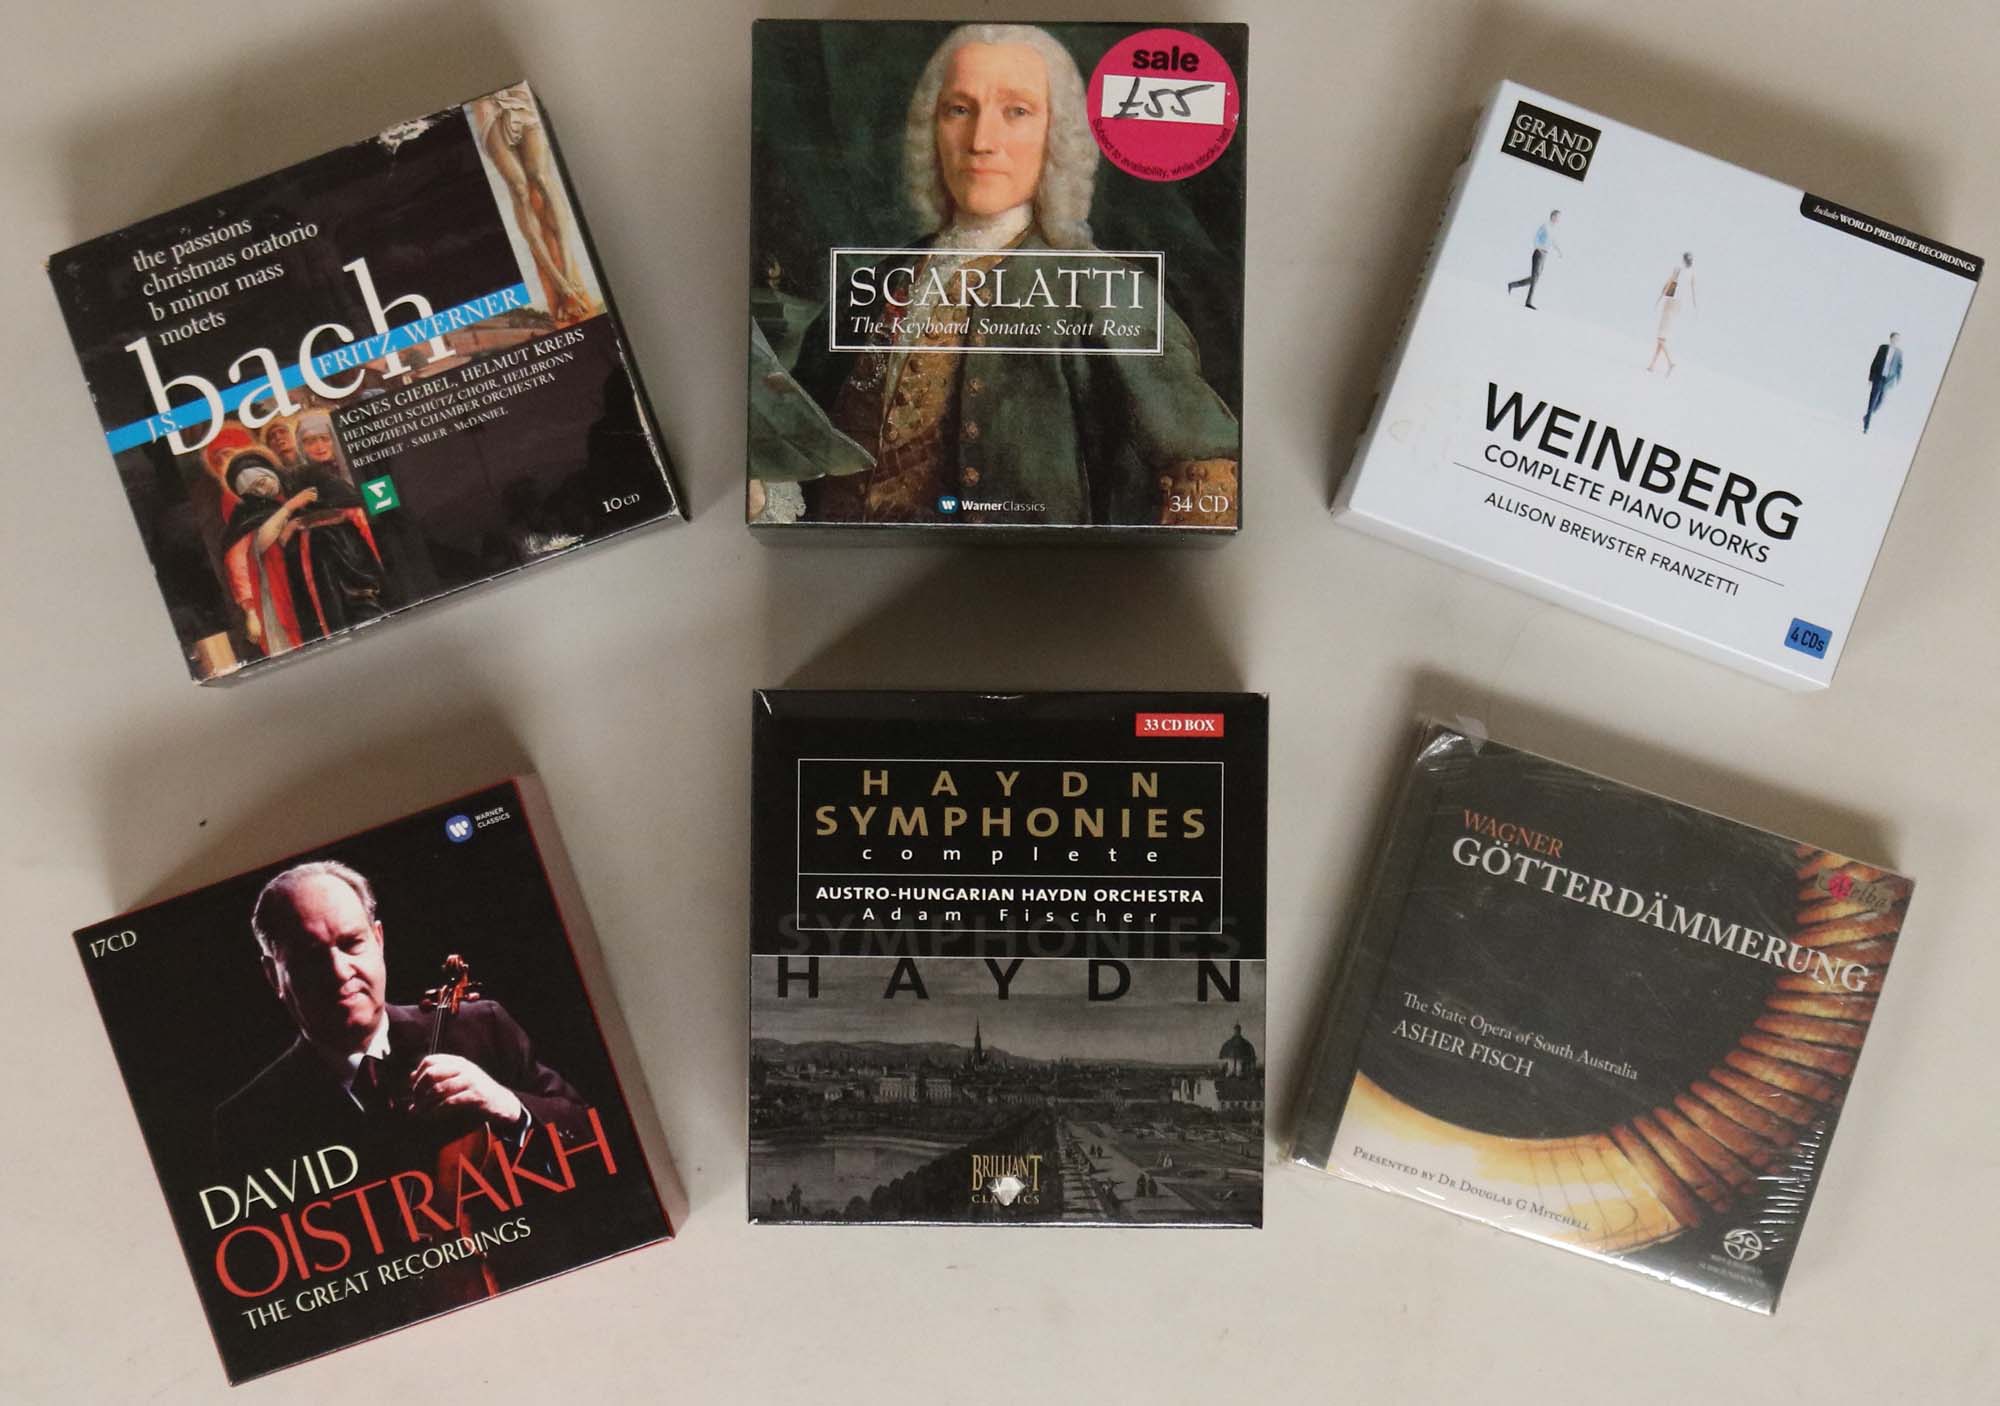 THE CLASSICAL CD BOX SET ARCHIVE. More top Classical box set rarities with 30 included.